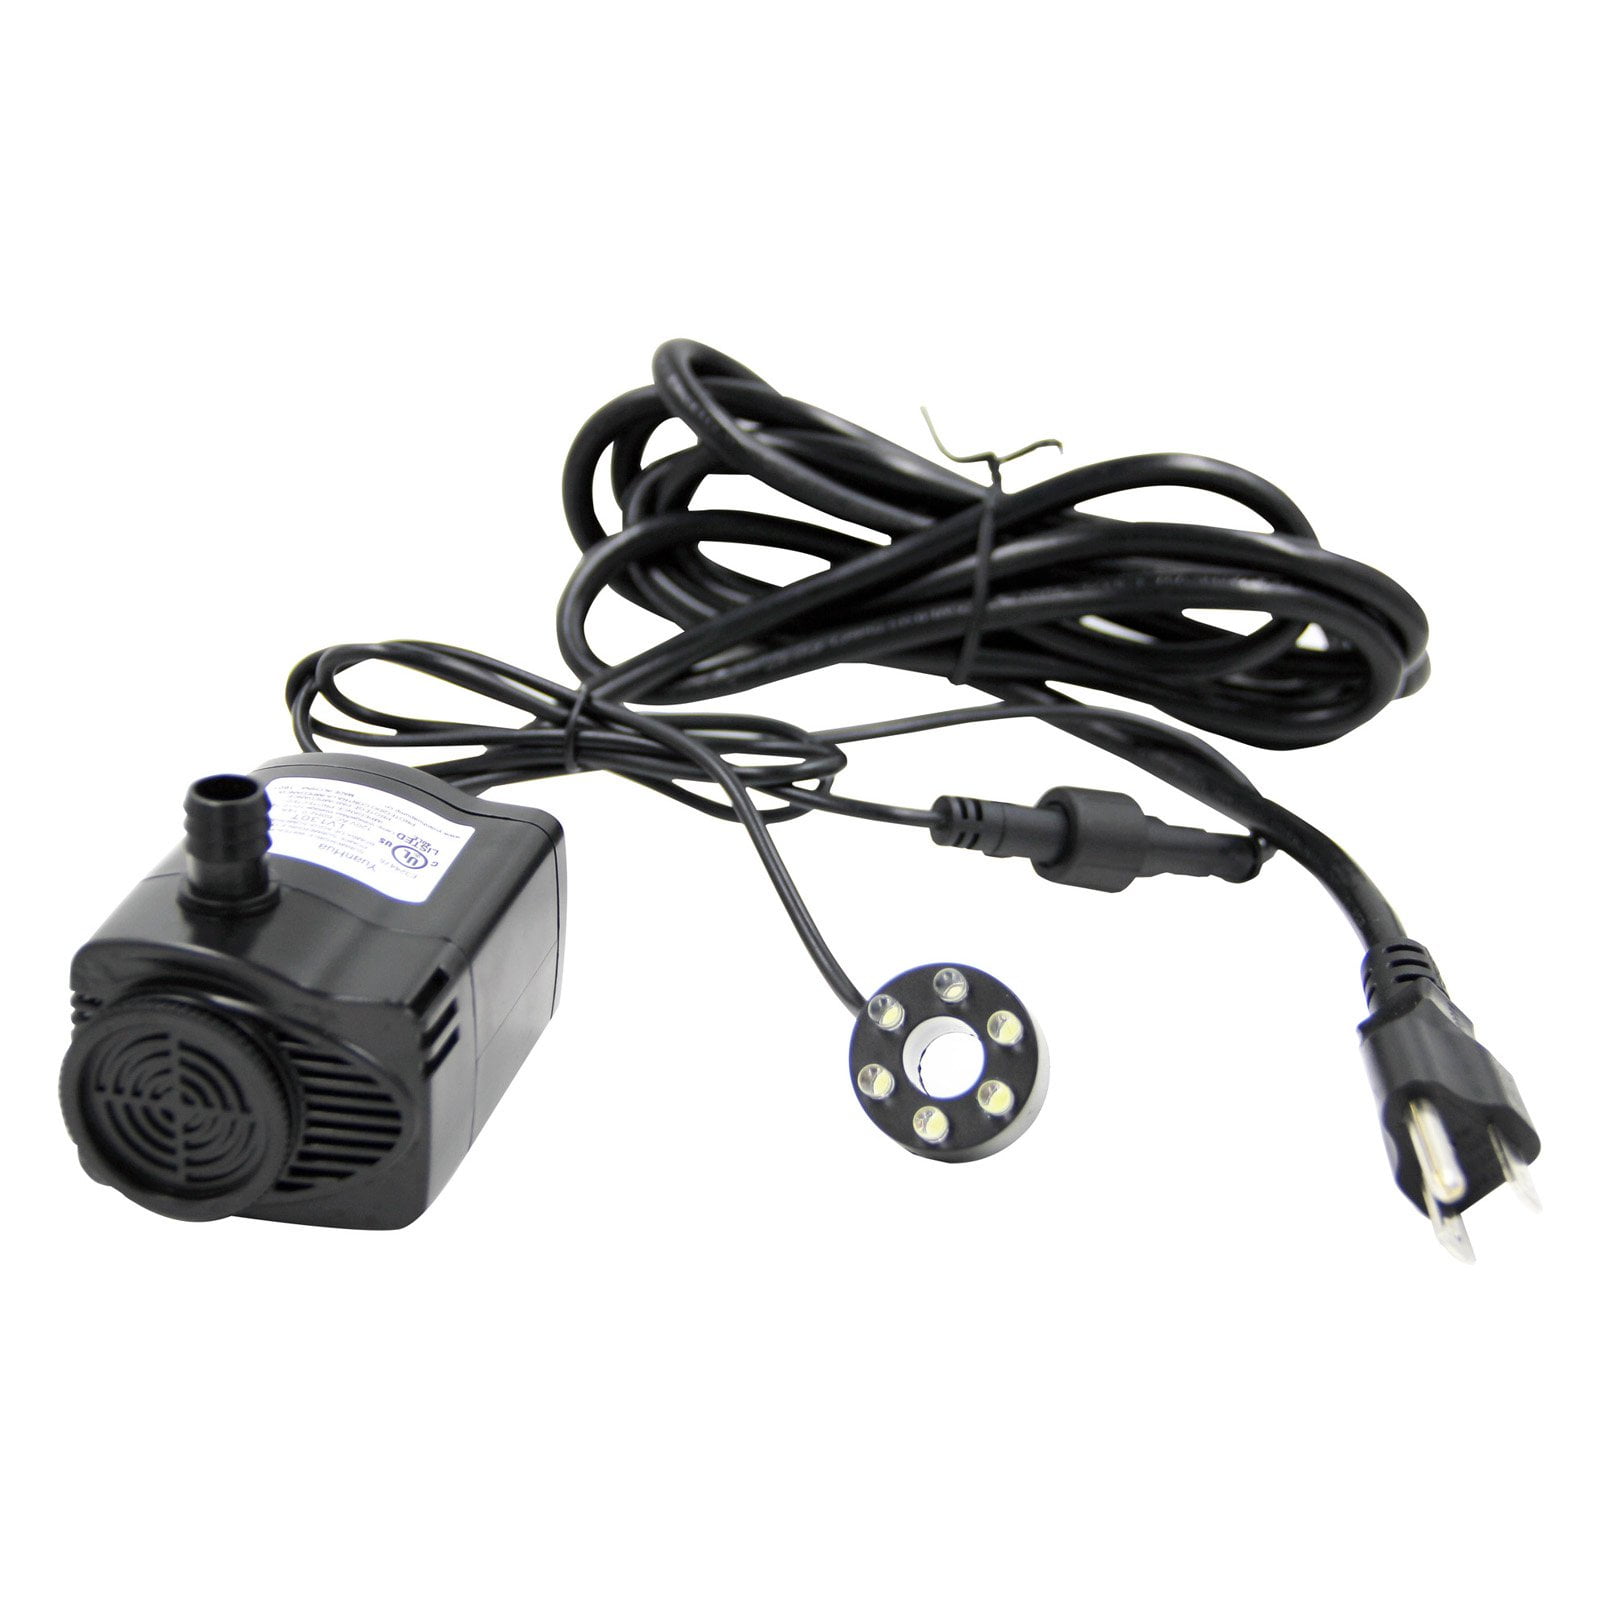 Peaktop Pt-505MIX 265 GPH/Lift Submersible Pump with 6 Cord for Fountain Aquarium